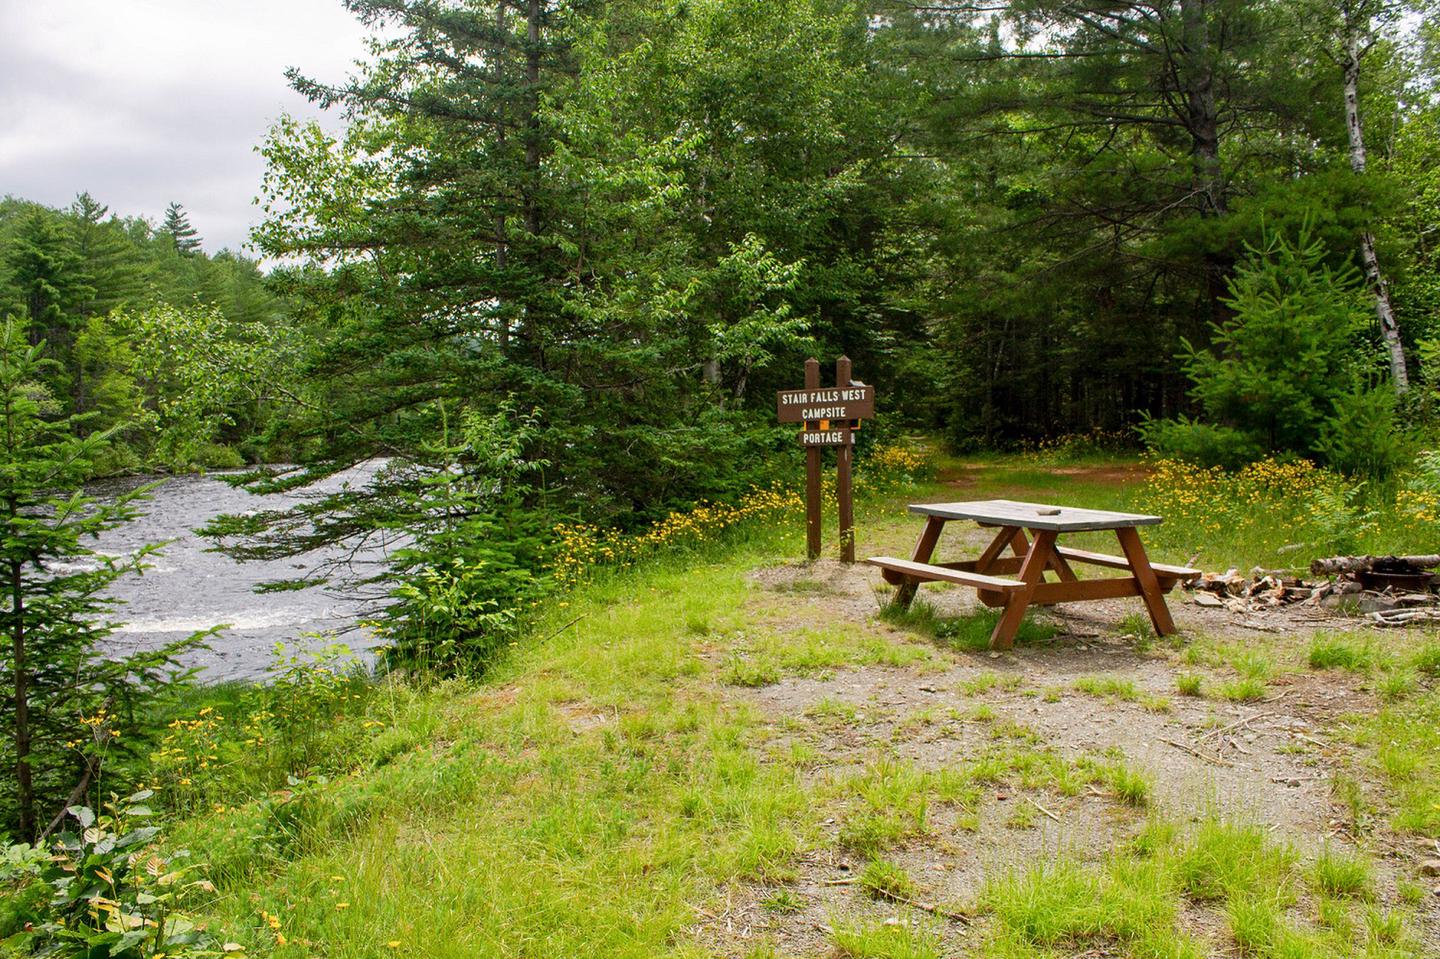 A gravel and grassy campsite to the right of a river. The campsite has a wooden picnic table, a brown wooden sign, and a trail that leads into the woods with tall dense green trees.Stair Falls campsite along the East Branch Penobscot River has a beautiful view of the river.